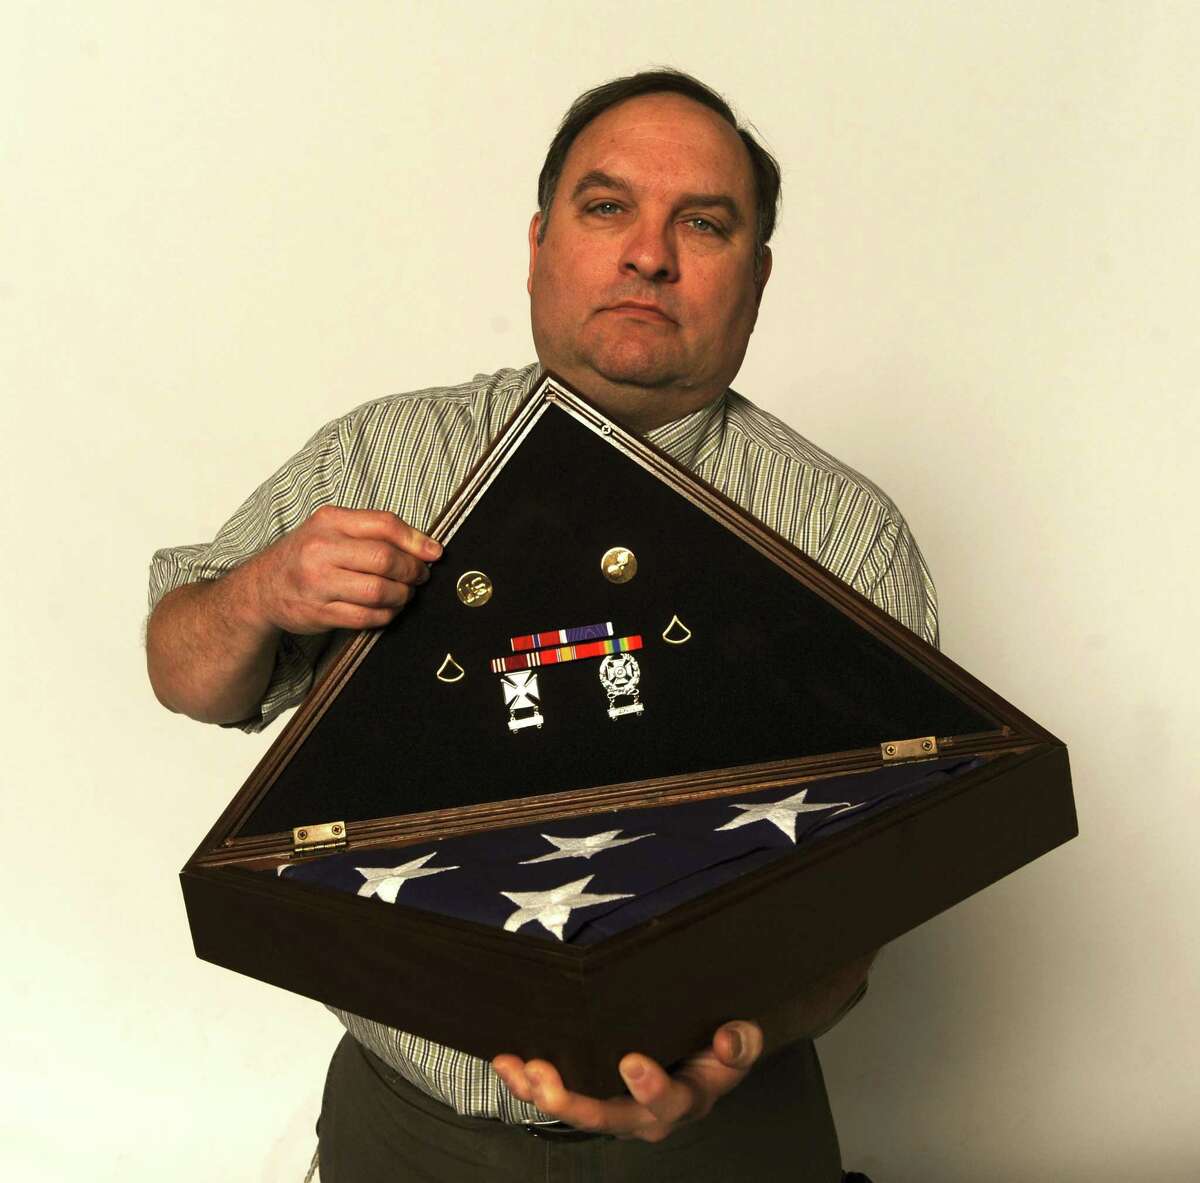 Patrick Miller displays decorations and the flag that draped the casket of his son, Army Pfc. Anthony Scott Miller, who died at age 19 on April 7, 2003, the first San Antonio native to die in the Iraq War.